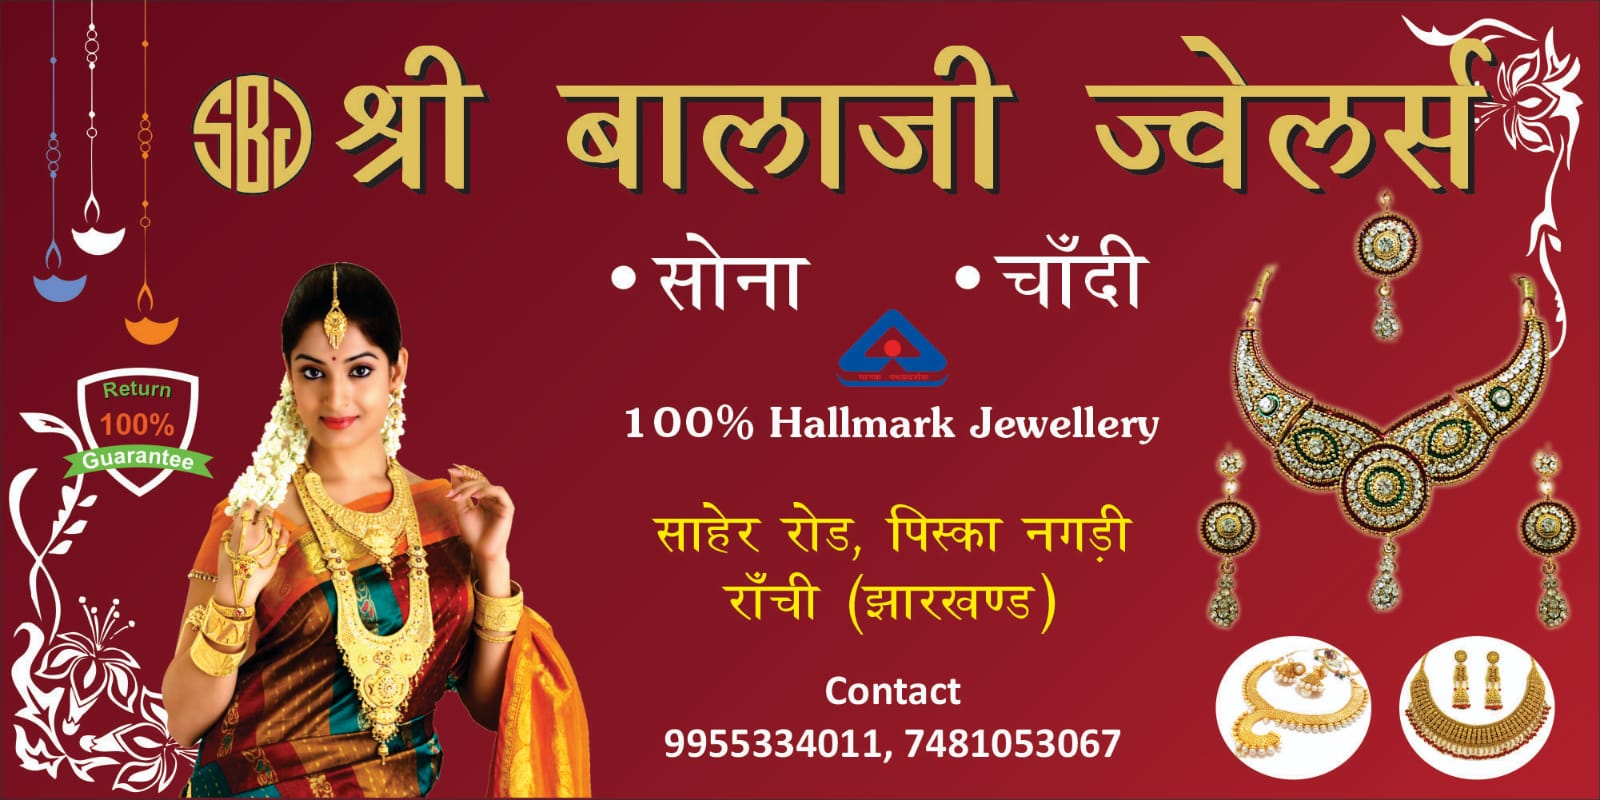 Silver shop ring road in Ranchi